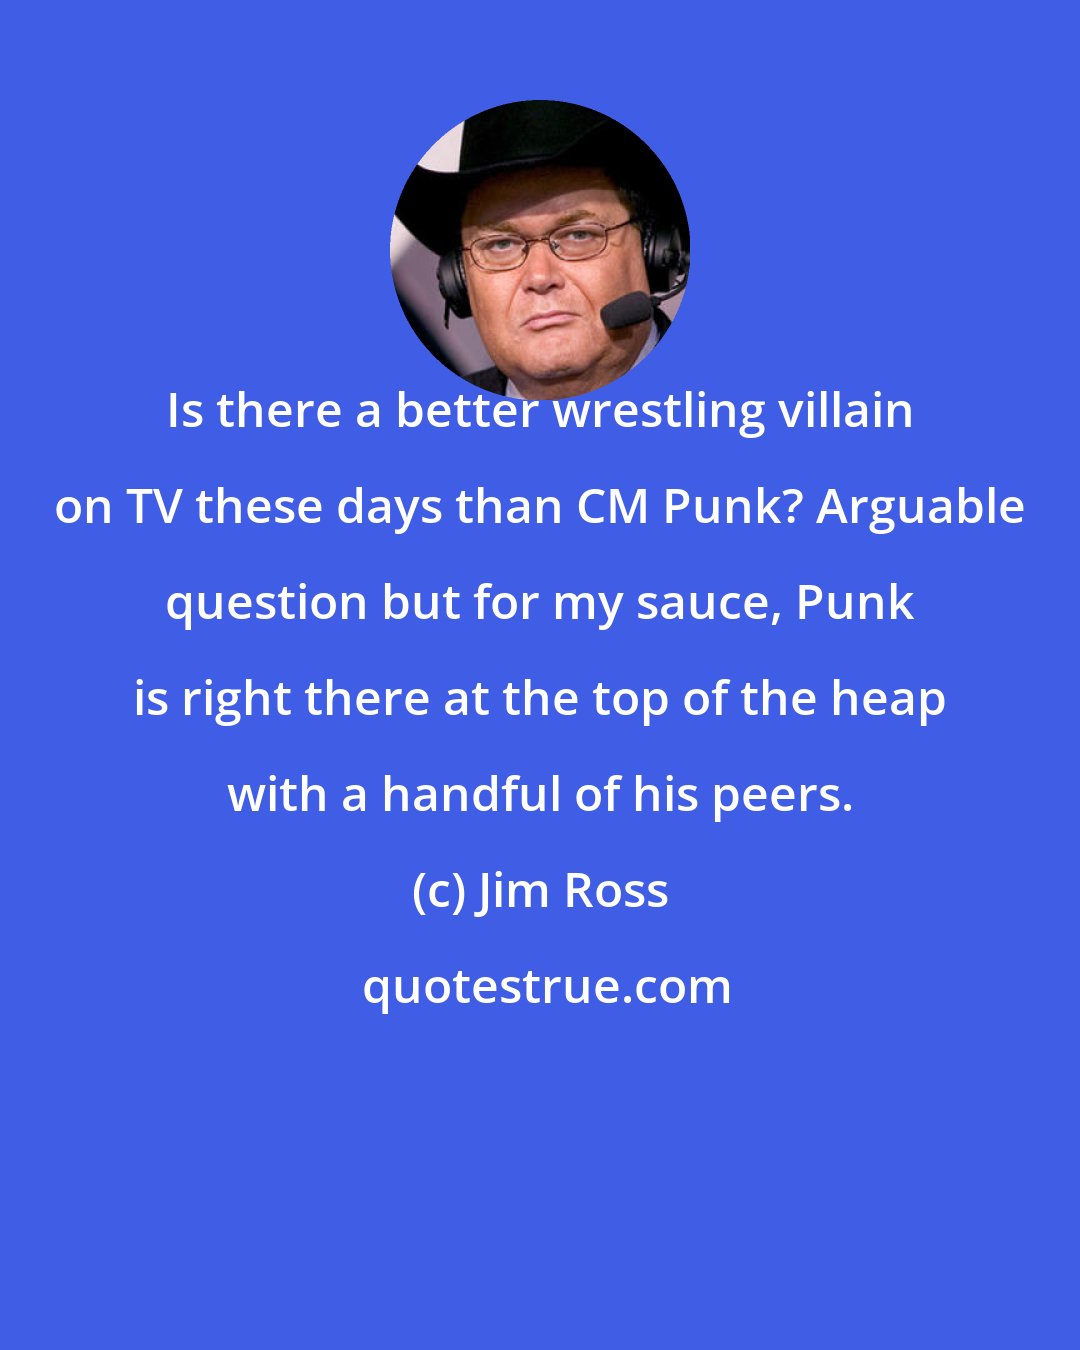 Jim Ross: Is there a better wrestling villain on TV these days than CM Punk? Arguable question but for my sauce, Punk is right there at the top of the heap with a handful of his peers.